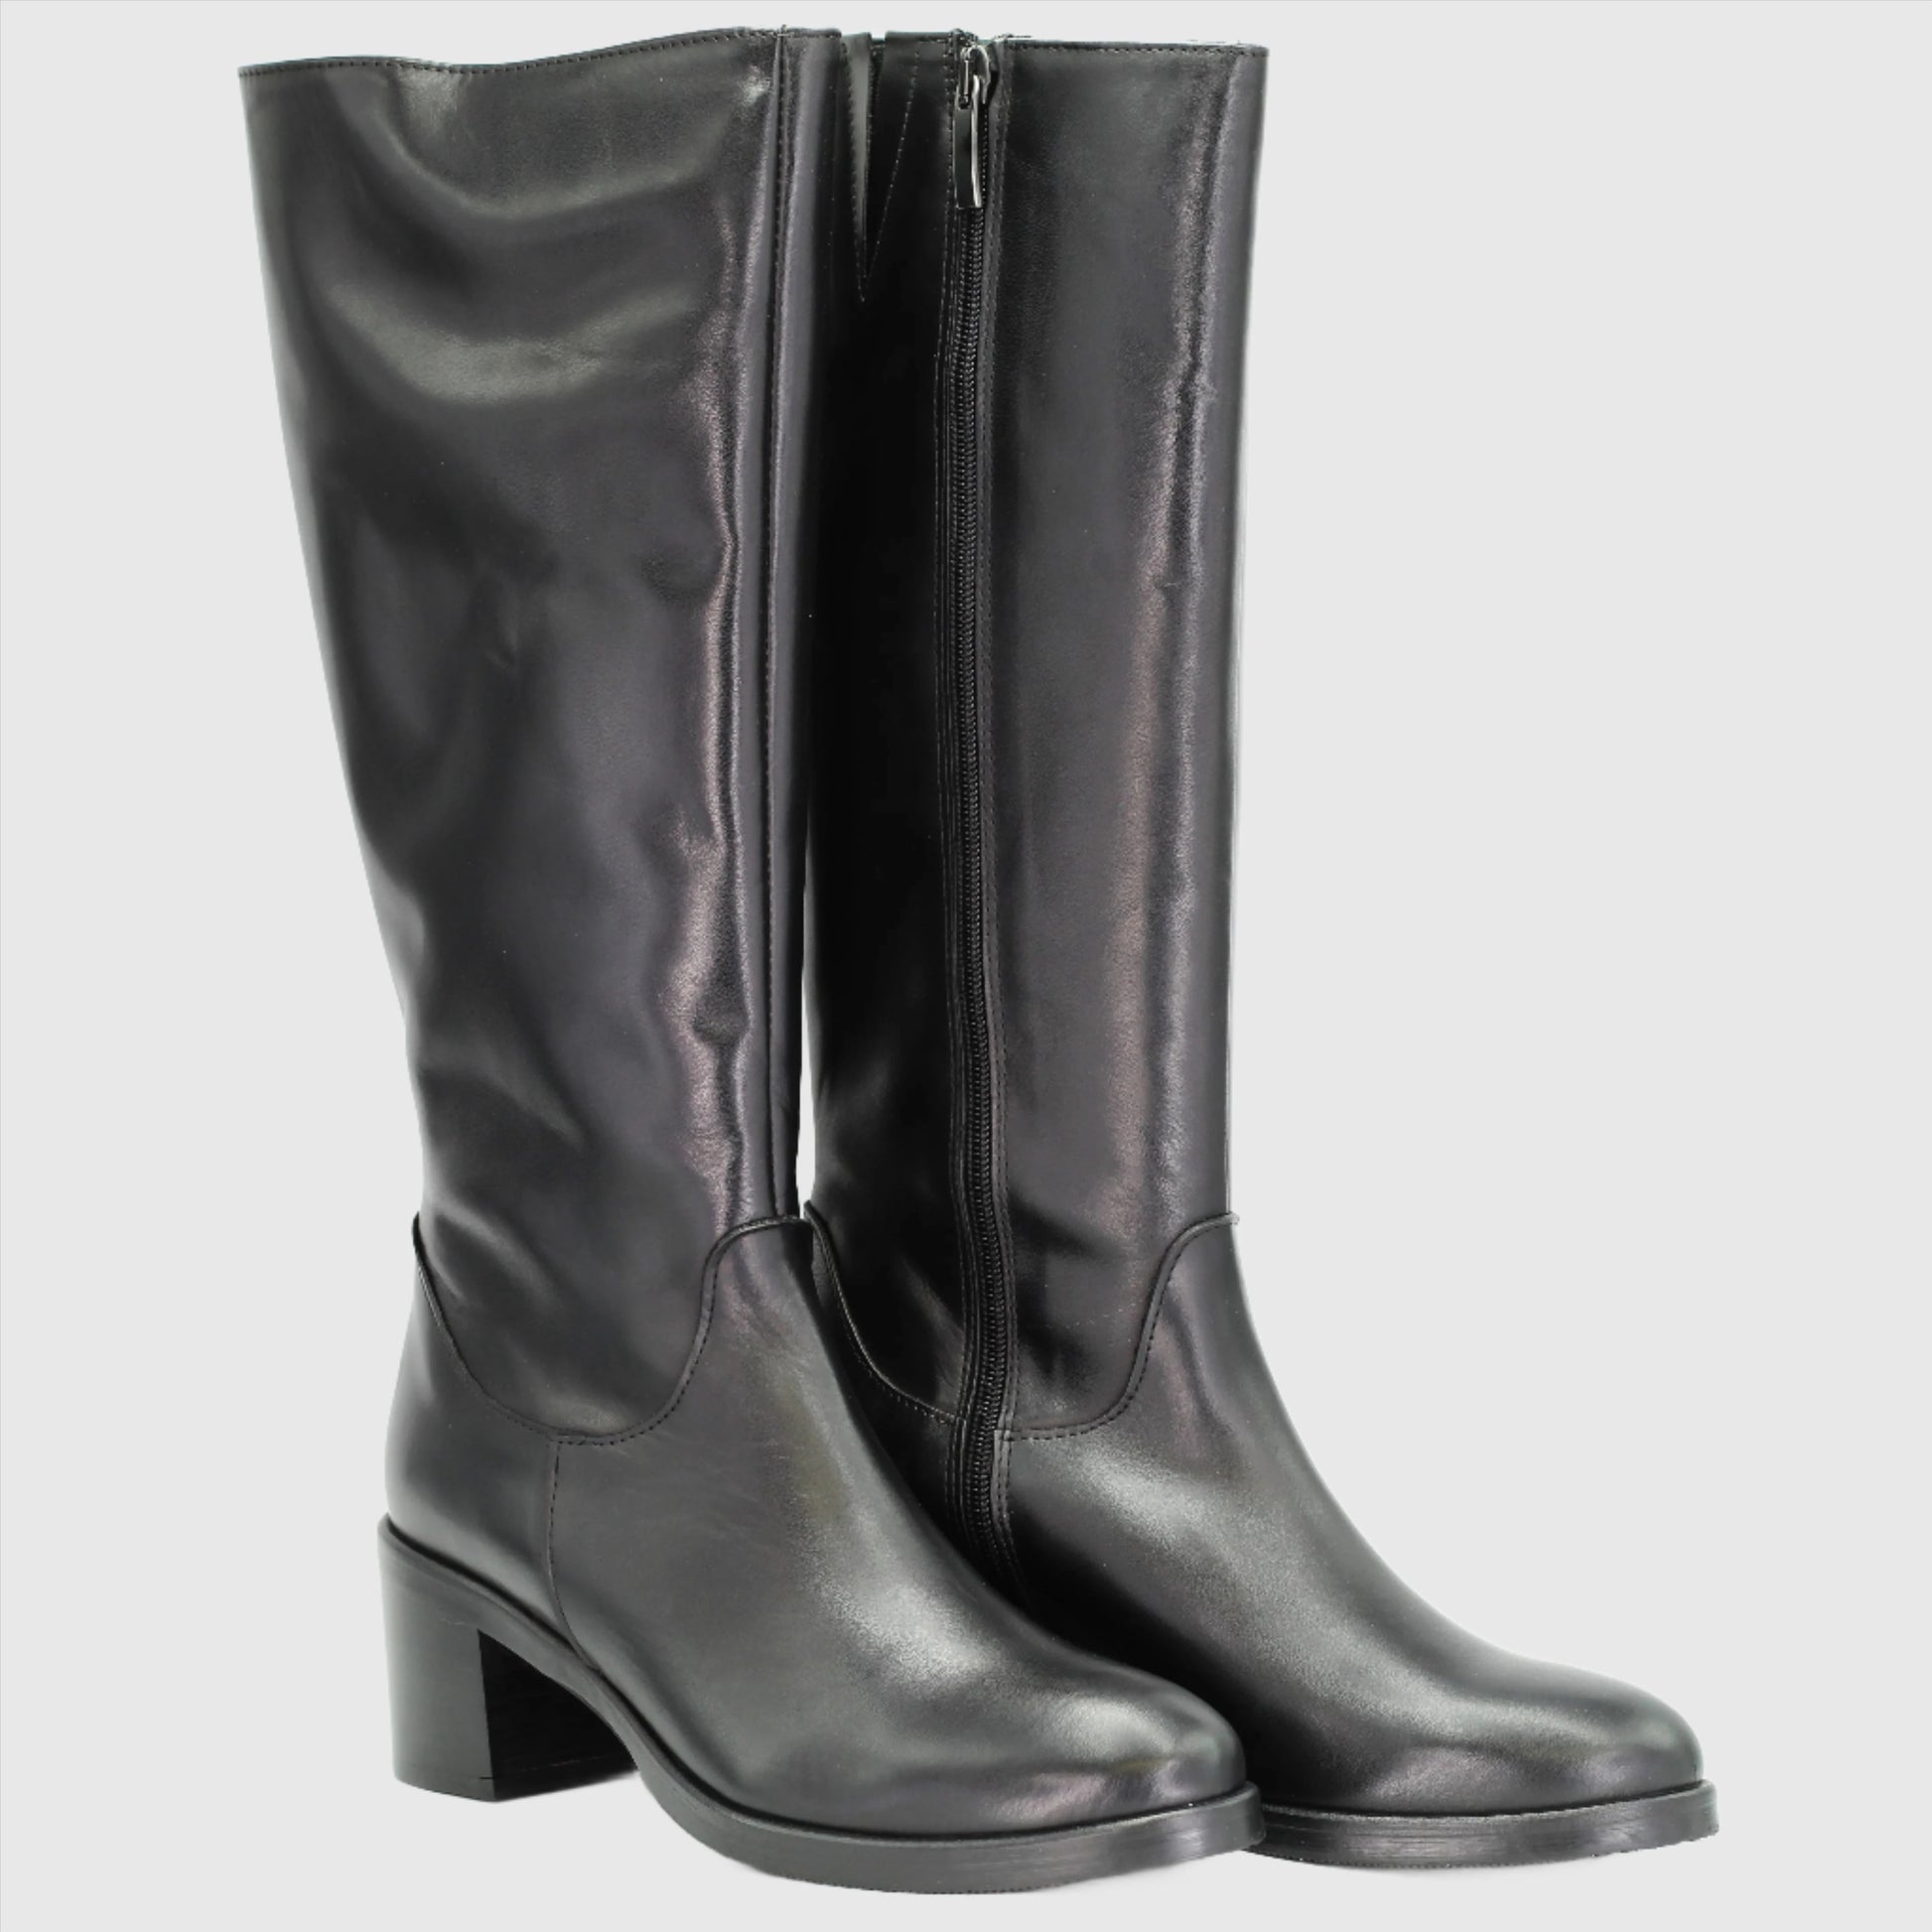 Shop Handmade Italian Leather equestrian boot in nero (GC2599) or browse our range of hand-made Italian shoes in leather or suede in-store at Aliverti Cape Town, or shop online. We deliver in South Africa & offer multiple payment plans as well as accept multiple safe & secure payment methods.